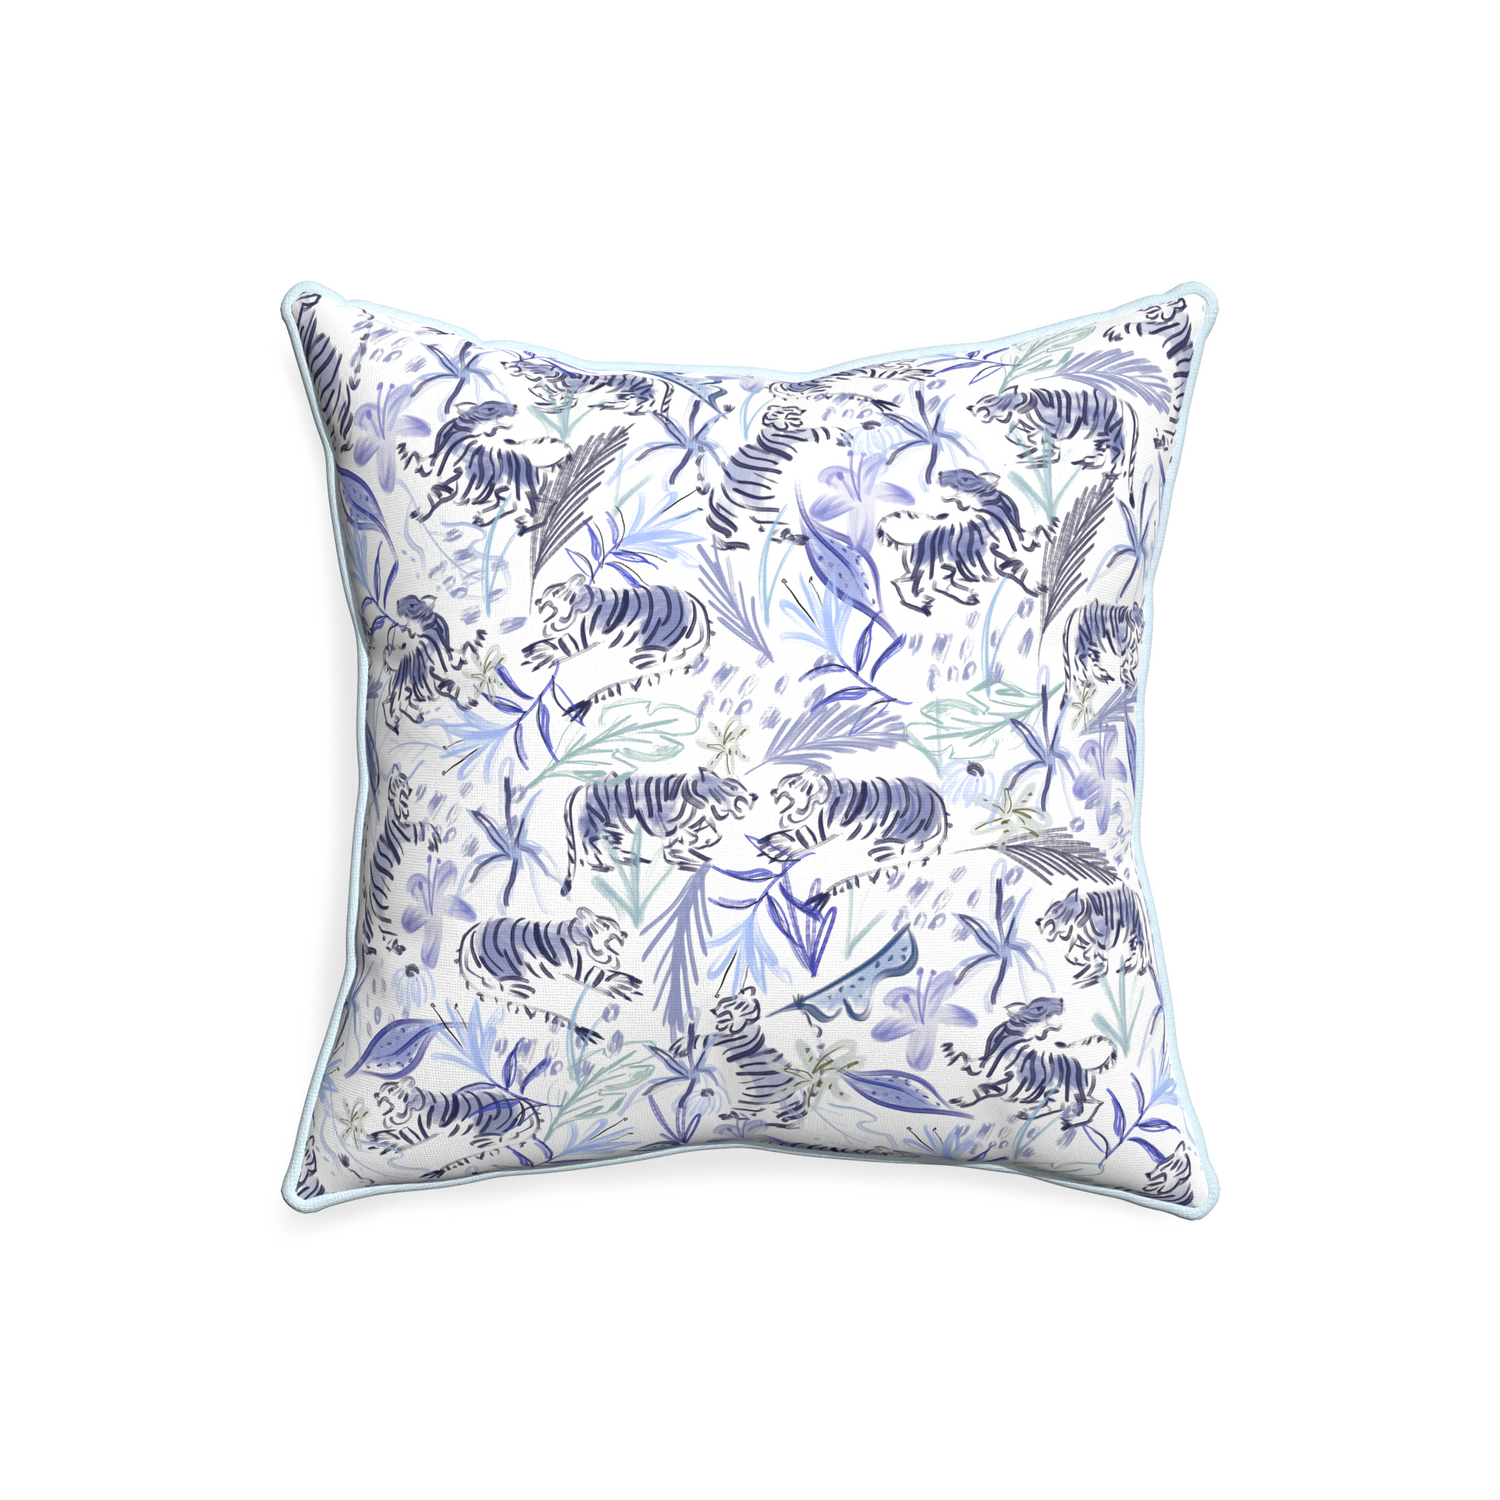 20-square frida blue custom blue with intricate tiger designpillow with powder piping on white background